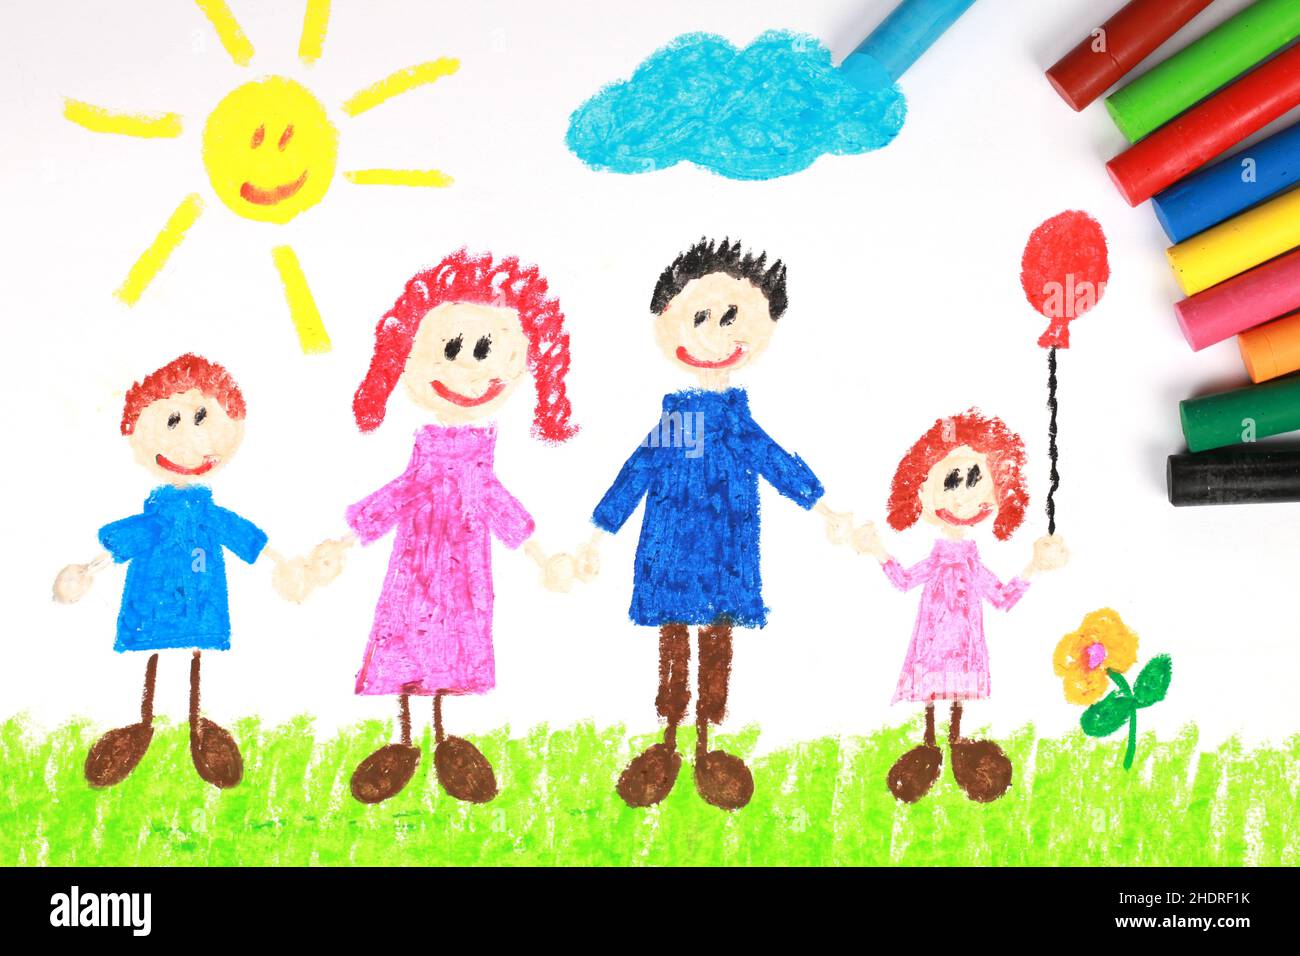 Kids Drawing Of Family And Colored Pencils On Wooden Table Stock Photo,  Picture and Royalty Free Image. Image 27543536.